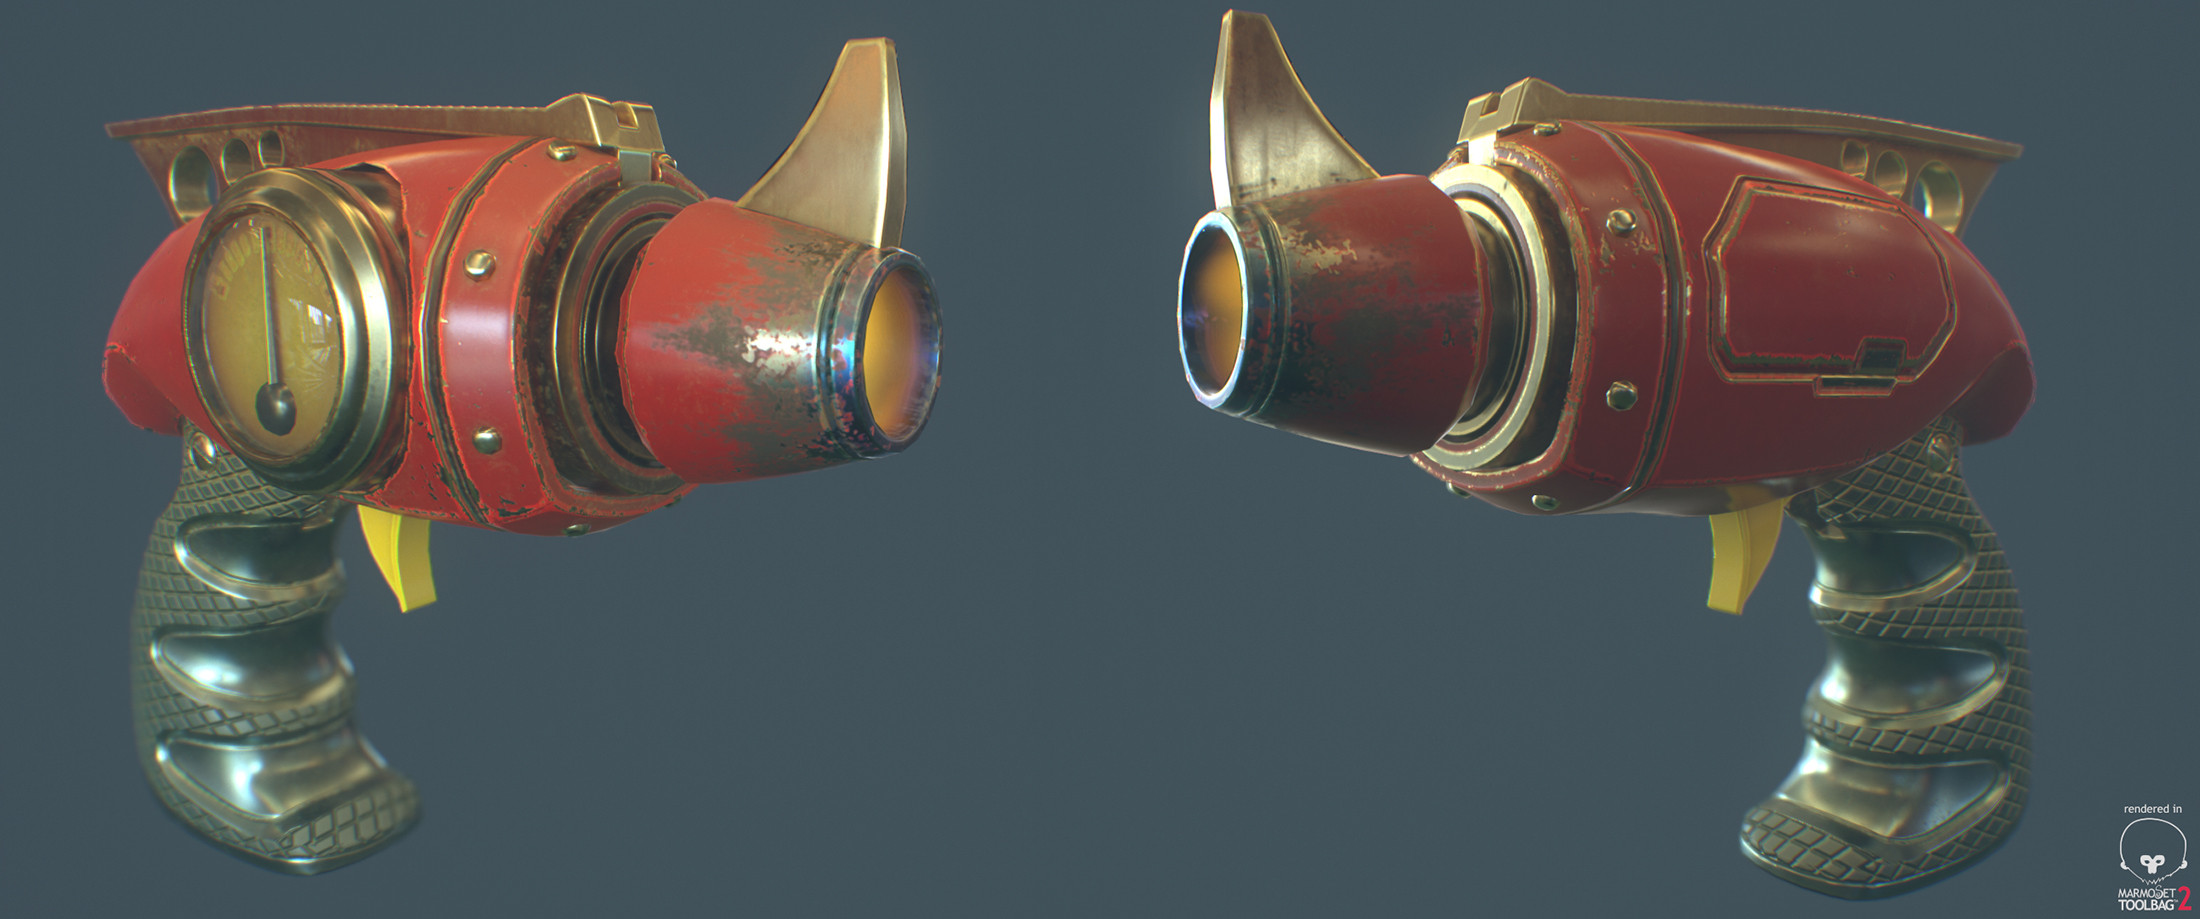 Marmoset Render - Front and Back